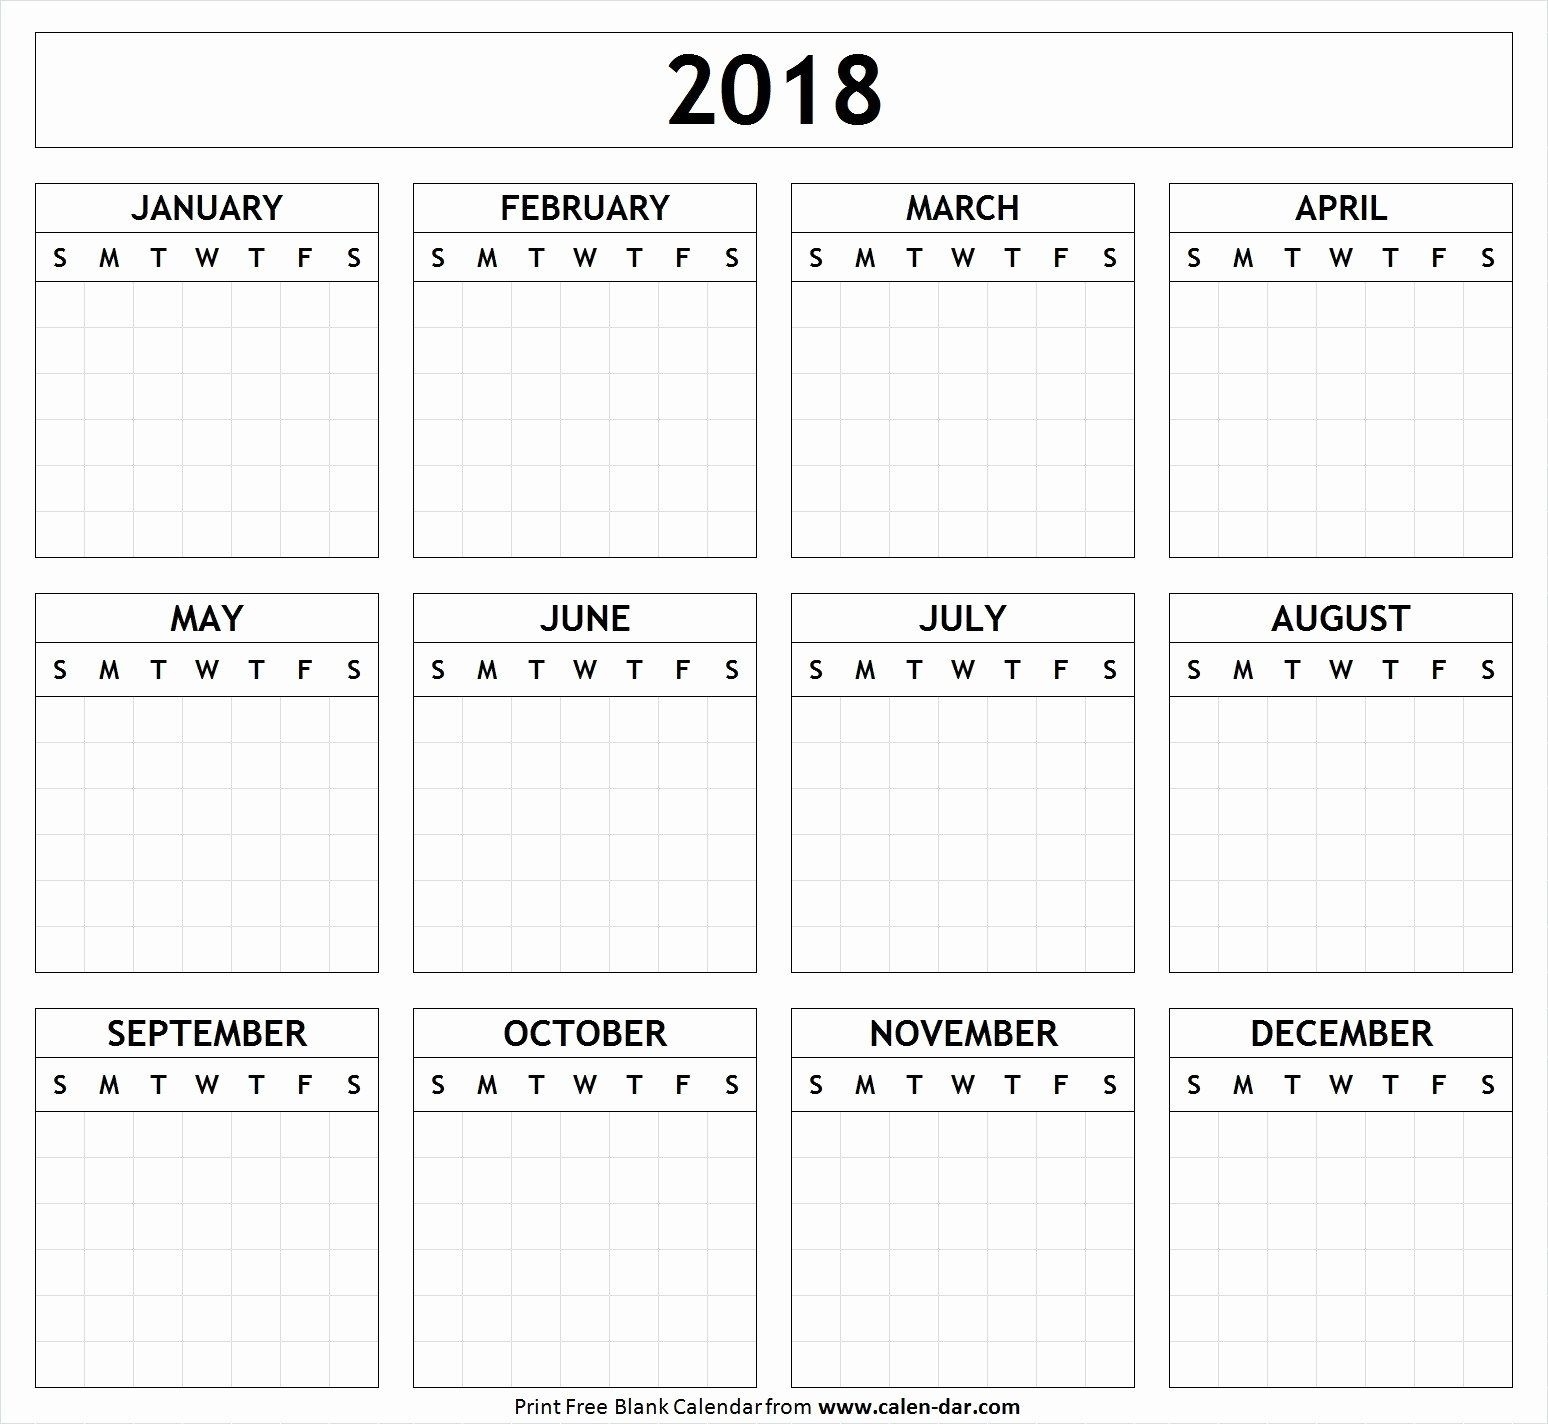 Calendar Template For Pages Mac New Mac Numbers Templates Calendar Template Pages Mac